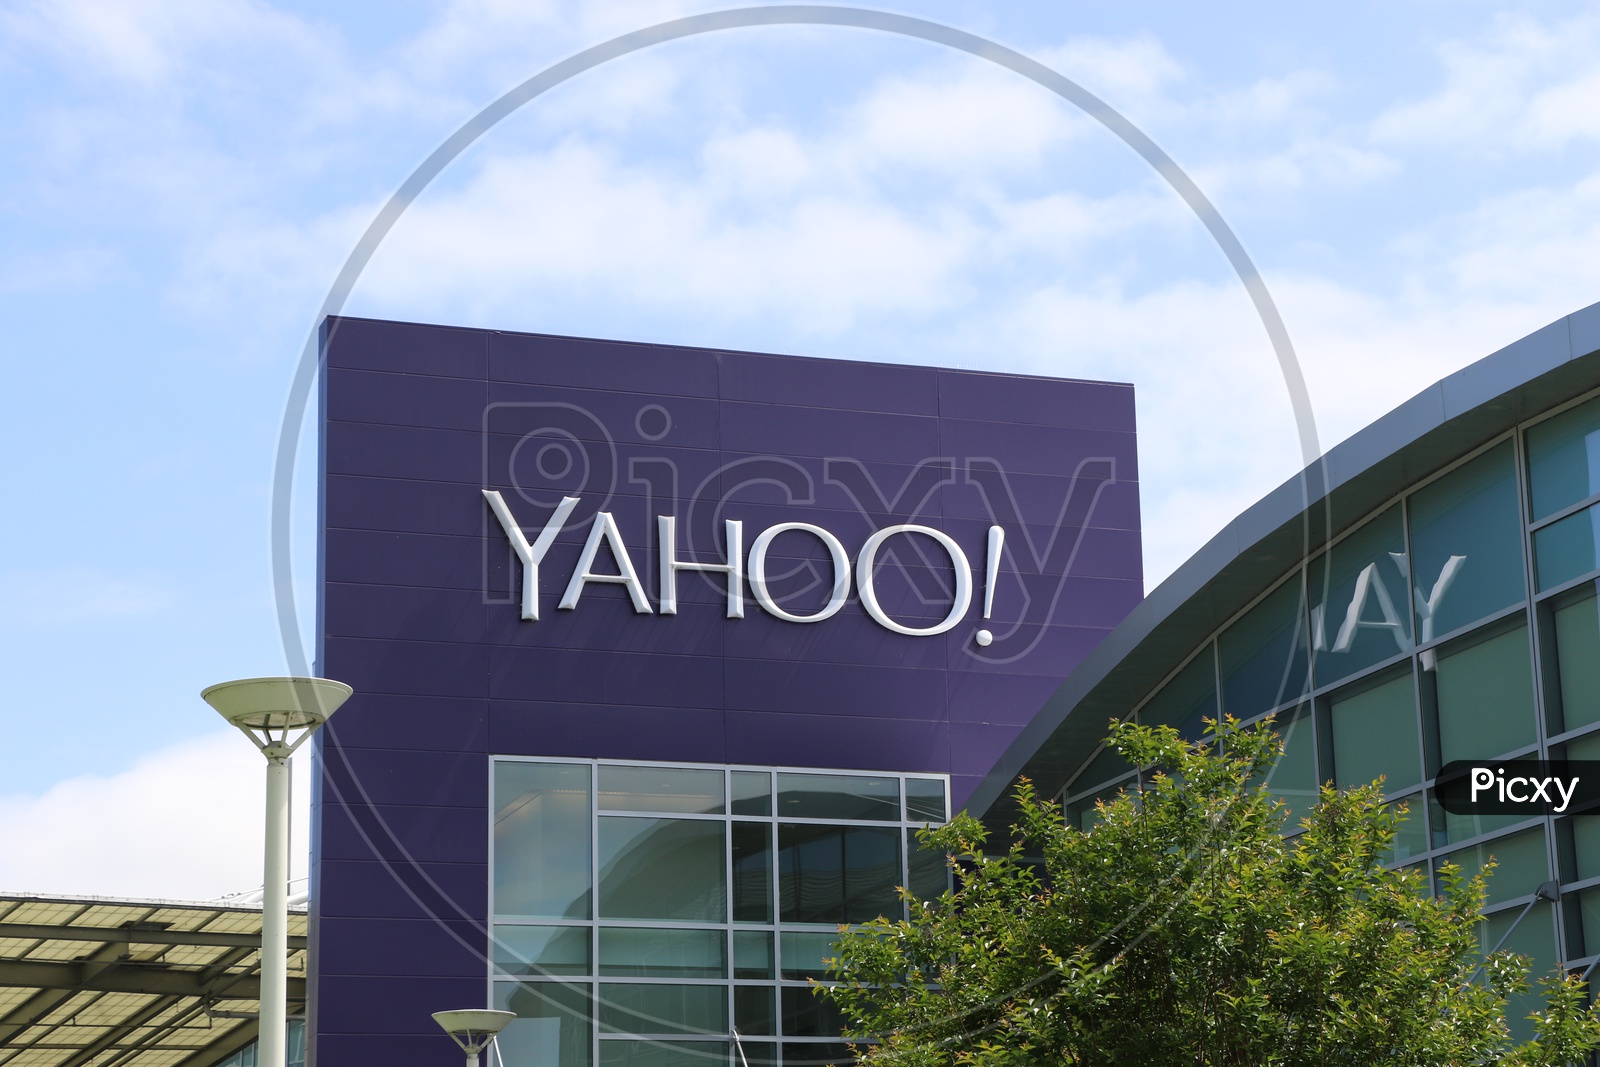 Yahoo Corporate office at Headquarters